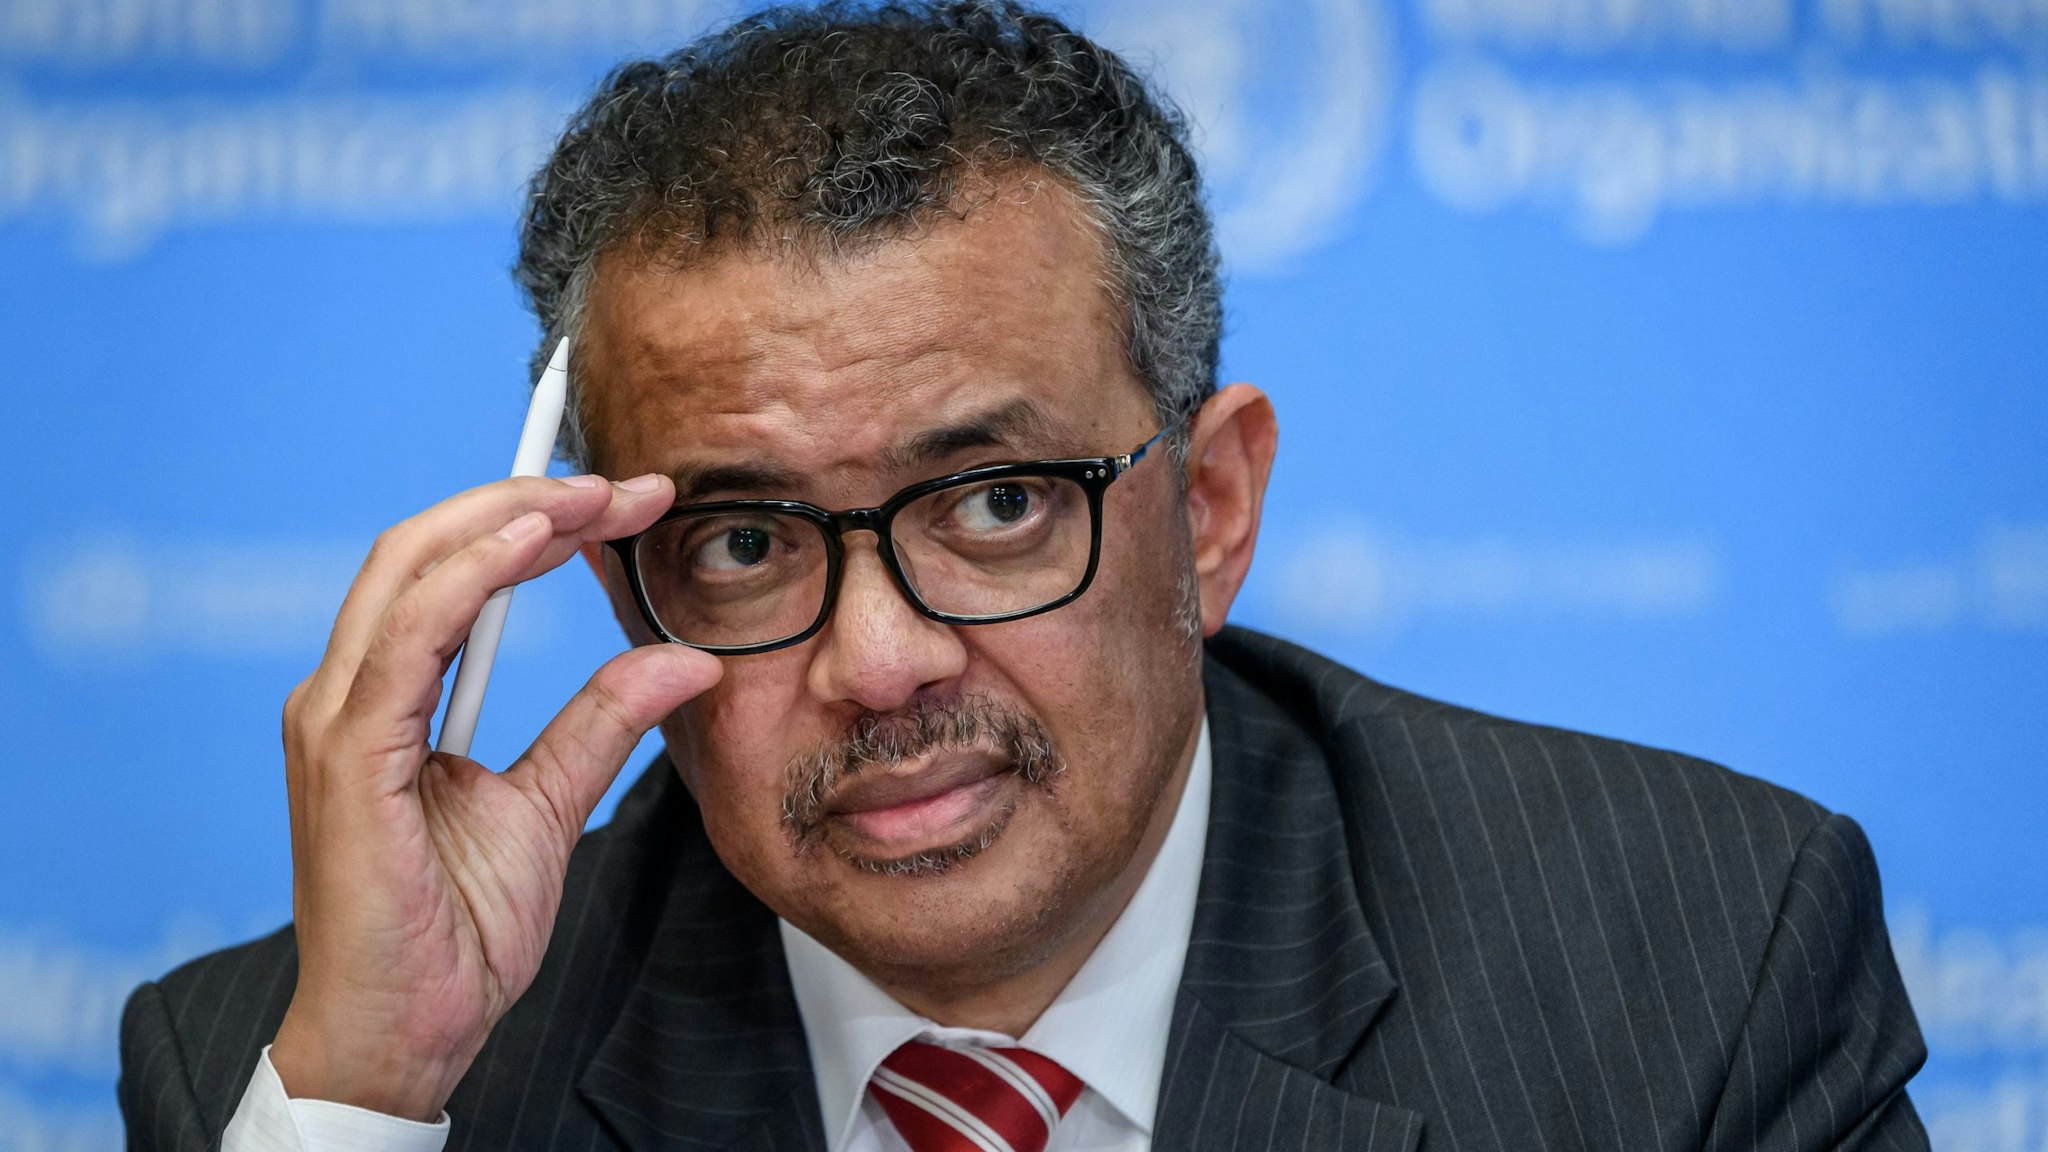 World Health Organization (WHO) Director-General Tedros Adhanom Ghebreyesus attends a daily press briefing on COVID-19, the disease caused by the novel coronavirus, at the WHO heardquaters in Geneva on March 11, 2020. - WHO Director-General Tedros Adhanom Ghebreyesus announced on March 11, 2020, that the new coronavirus outbreak can now be characterised as a pandemic. (Photo by Fabrice COFFRINI / AFP) (Photo by FABRICE COFFRINI/AFP via Getty Images)